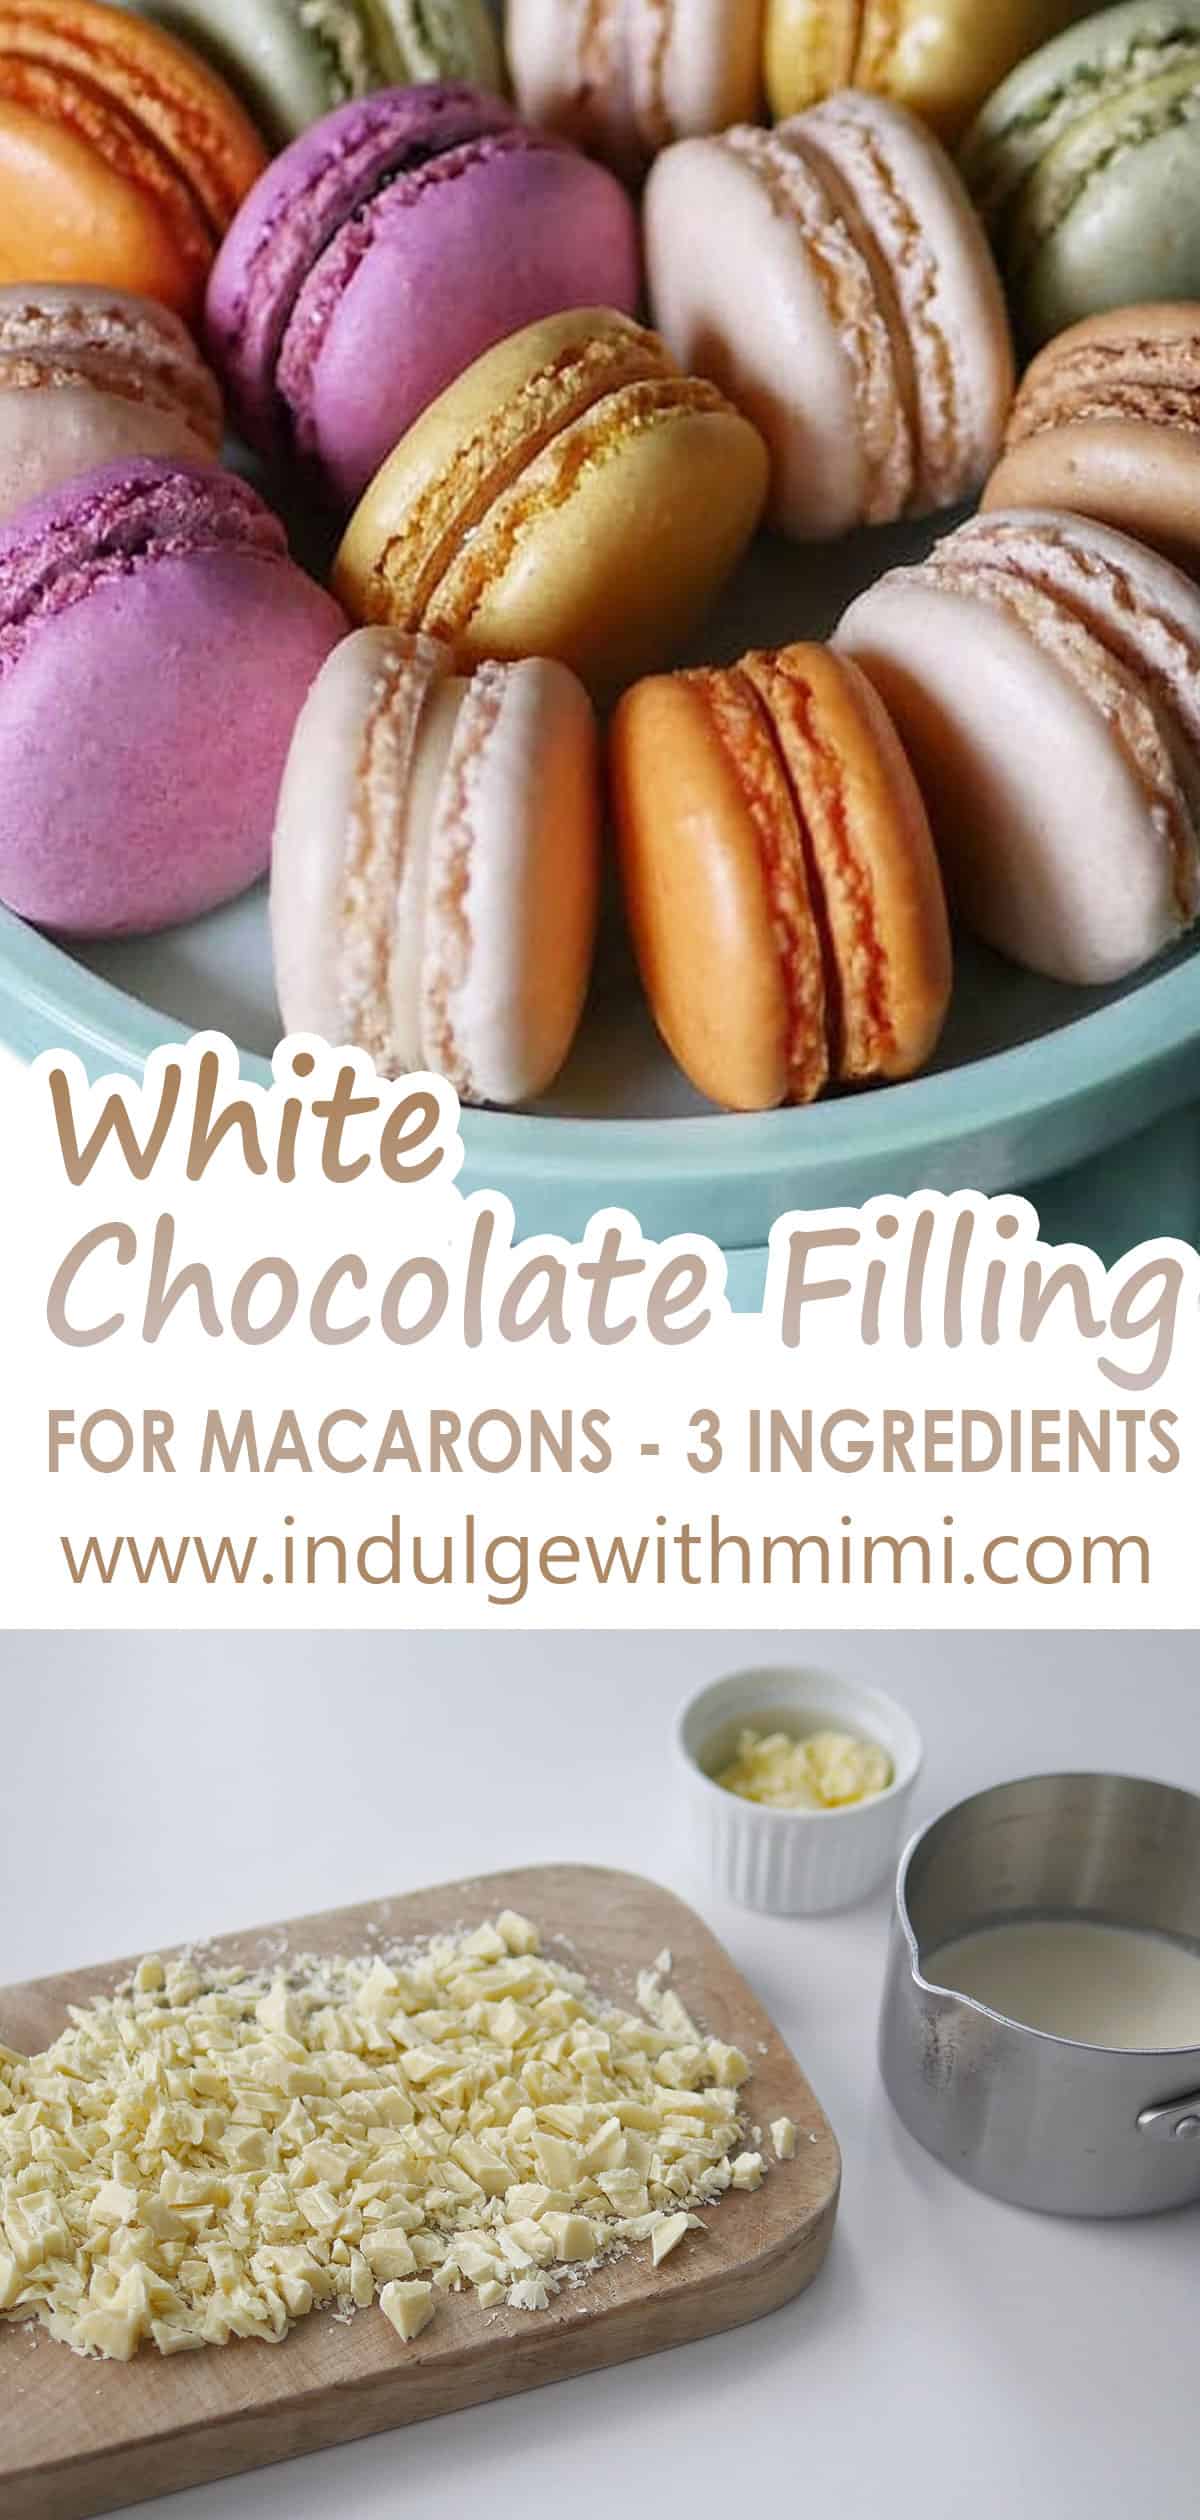 Macarons filled with white chocolate on a cake stand with some ingredients on the counter. 